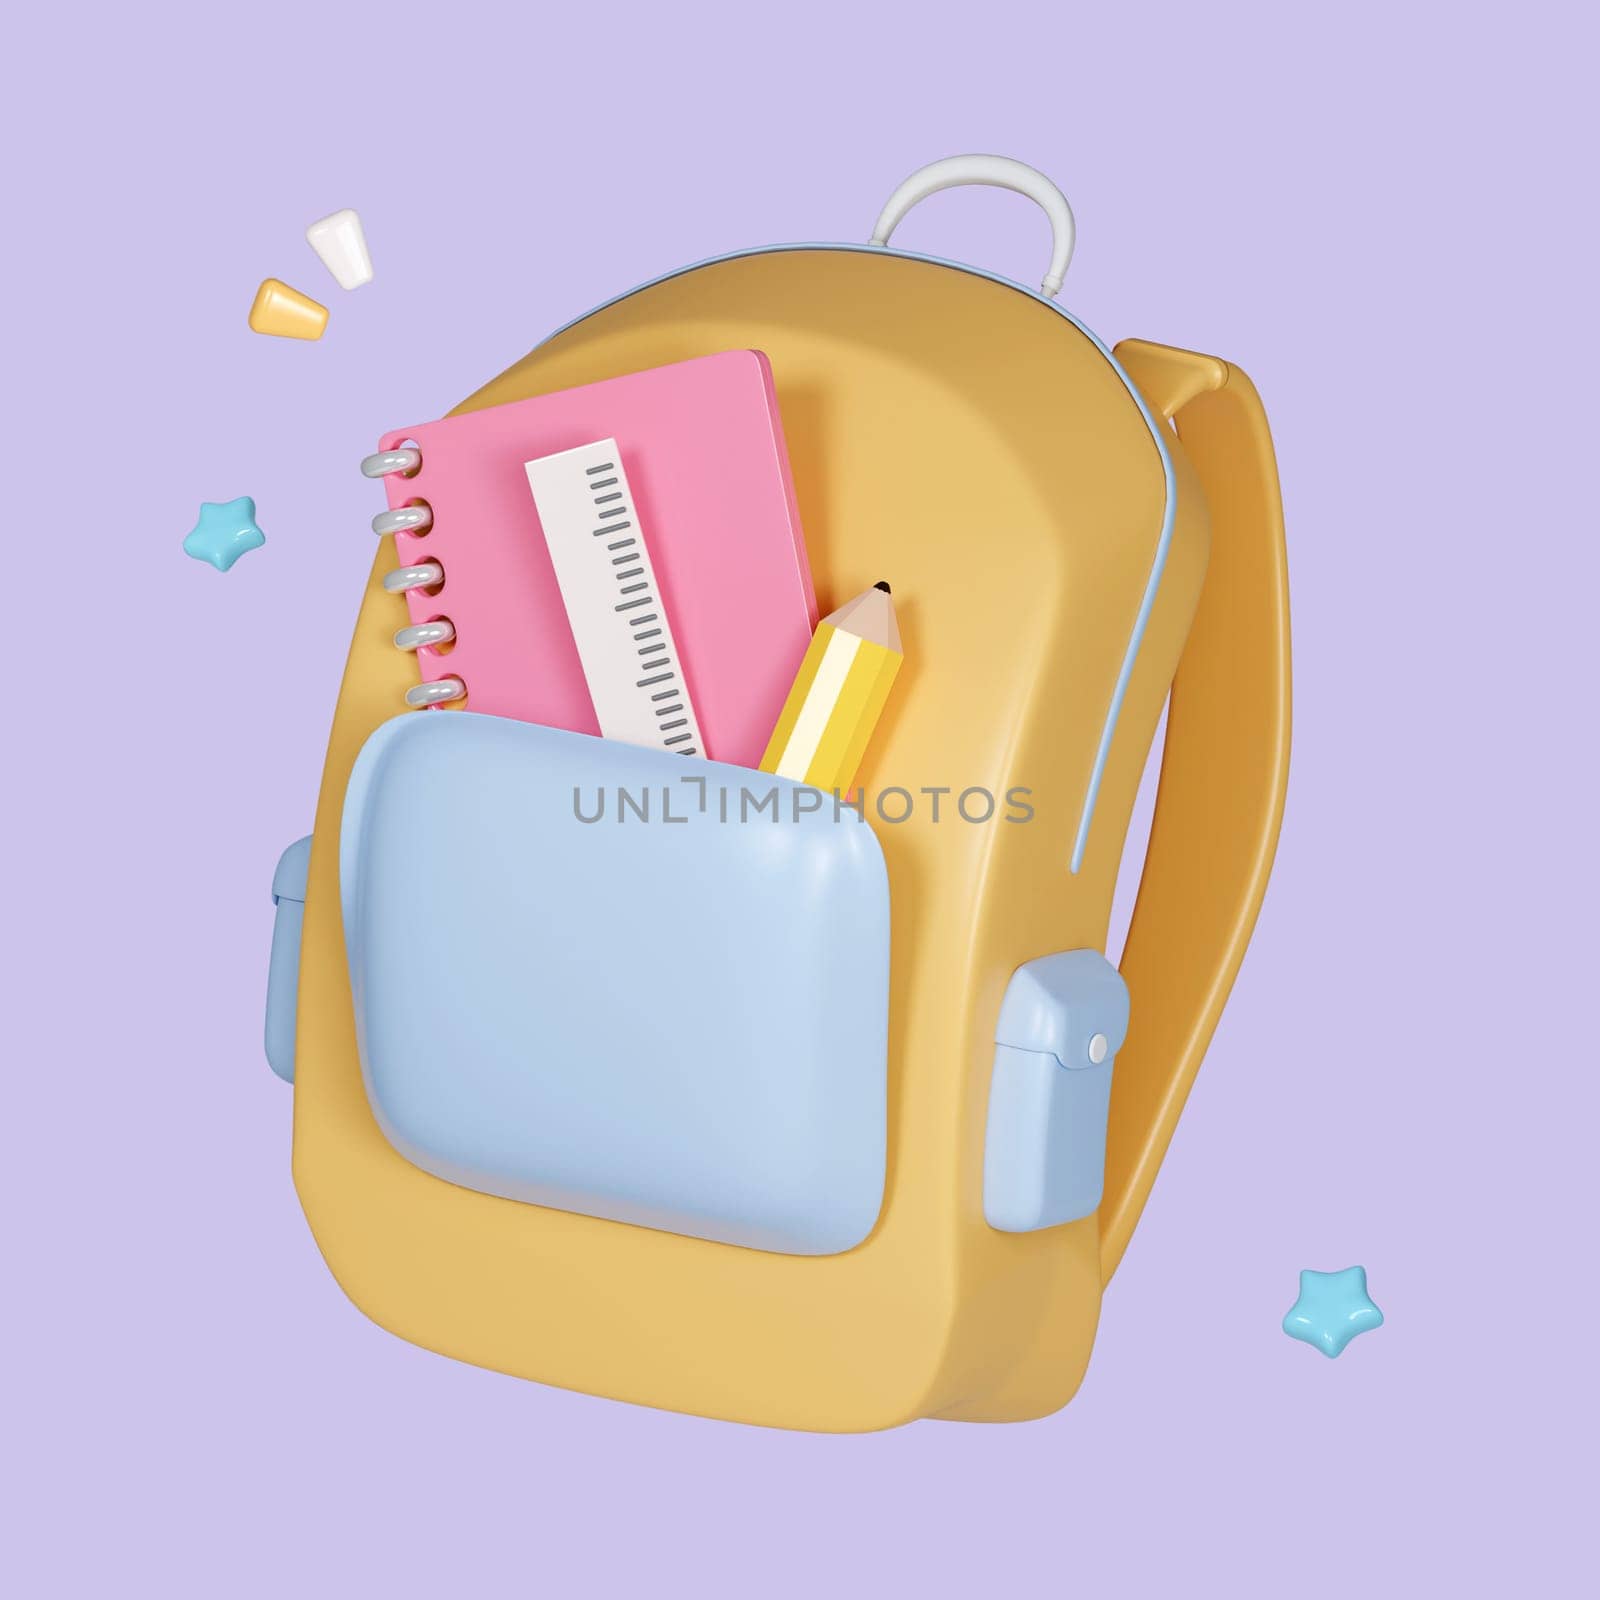 3D bag backpack school education icon isolated on background. 3d rendering illustration. Clipping path of each element included. by meepiangraphic